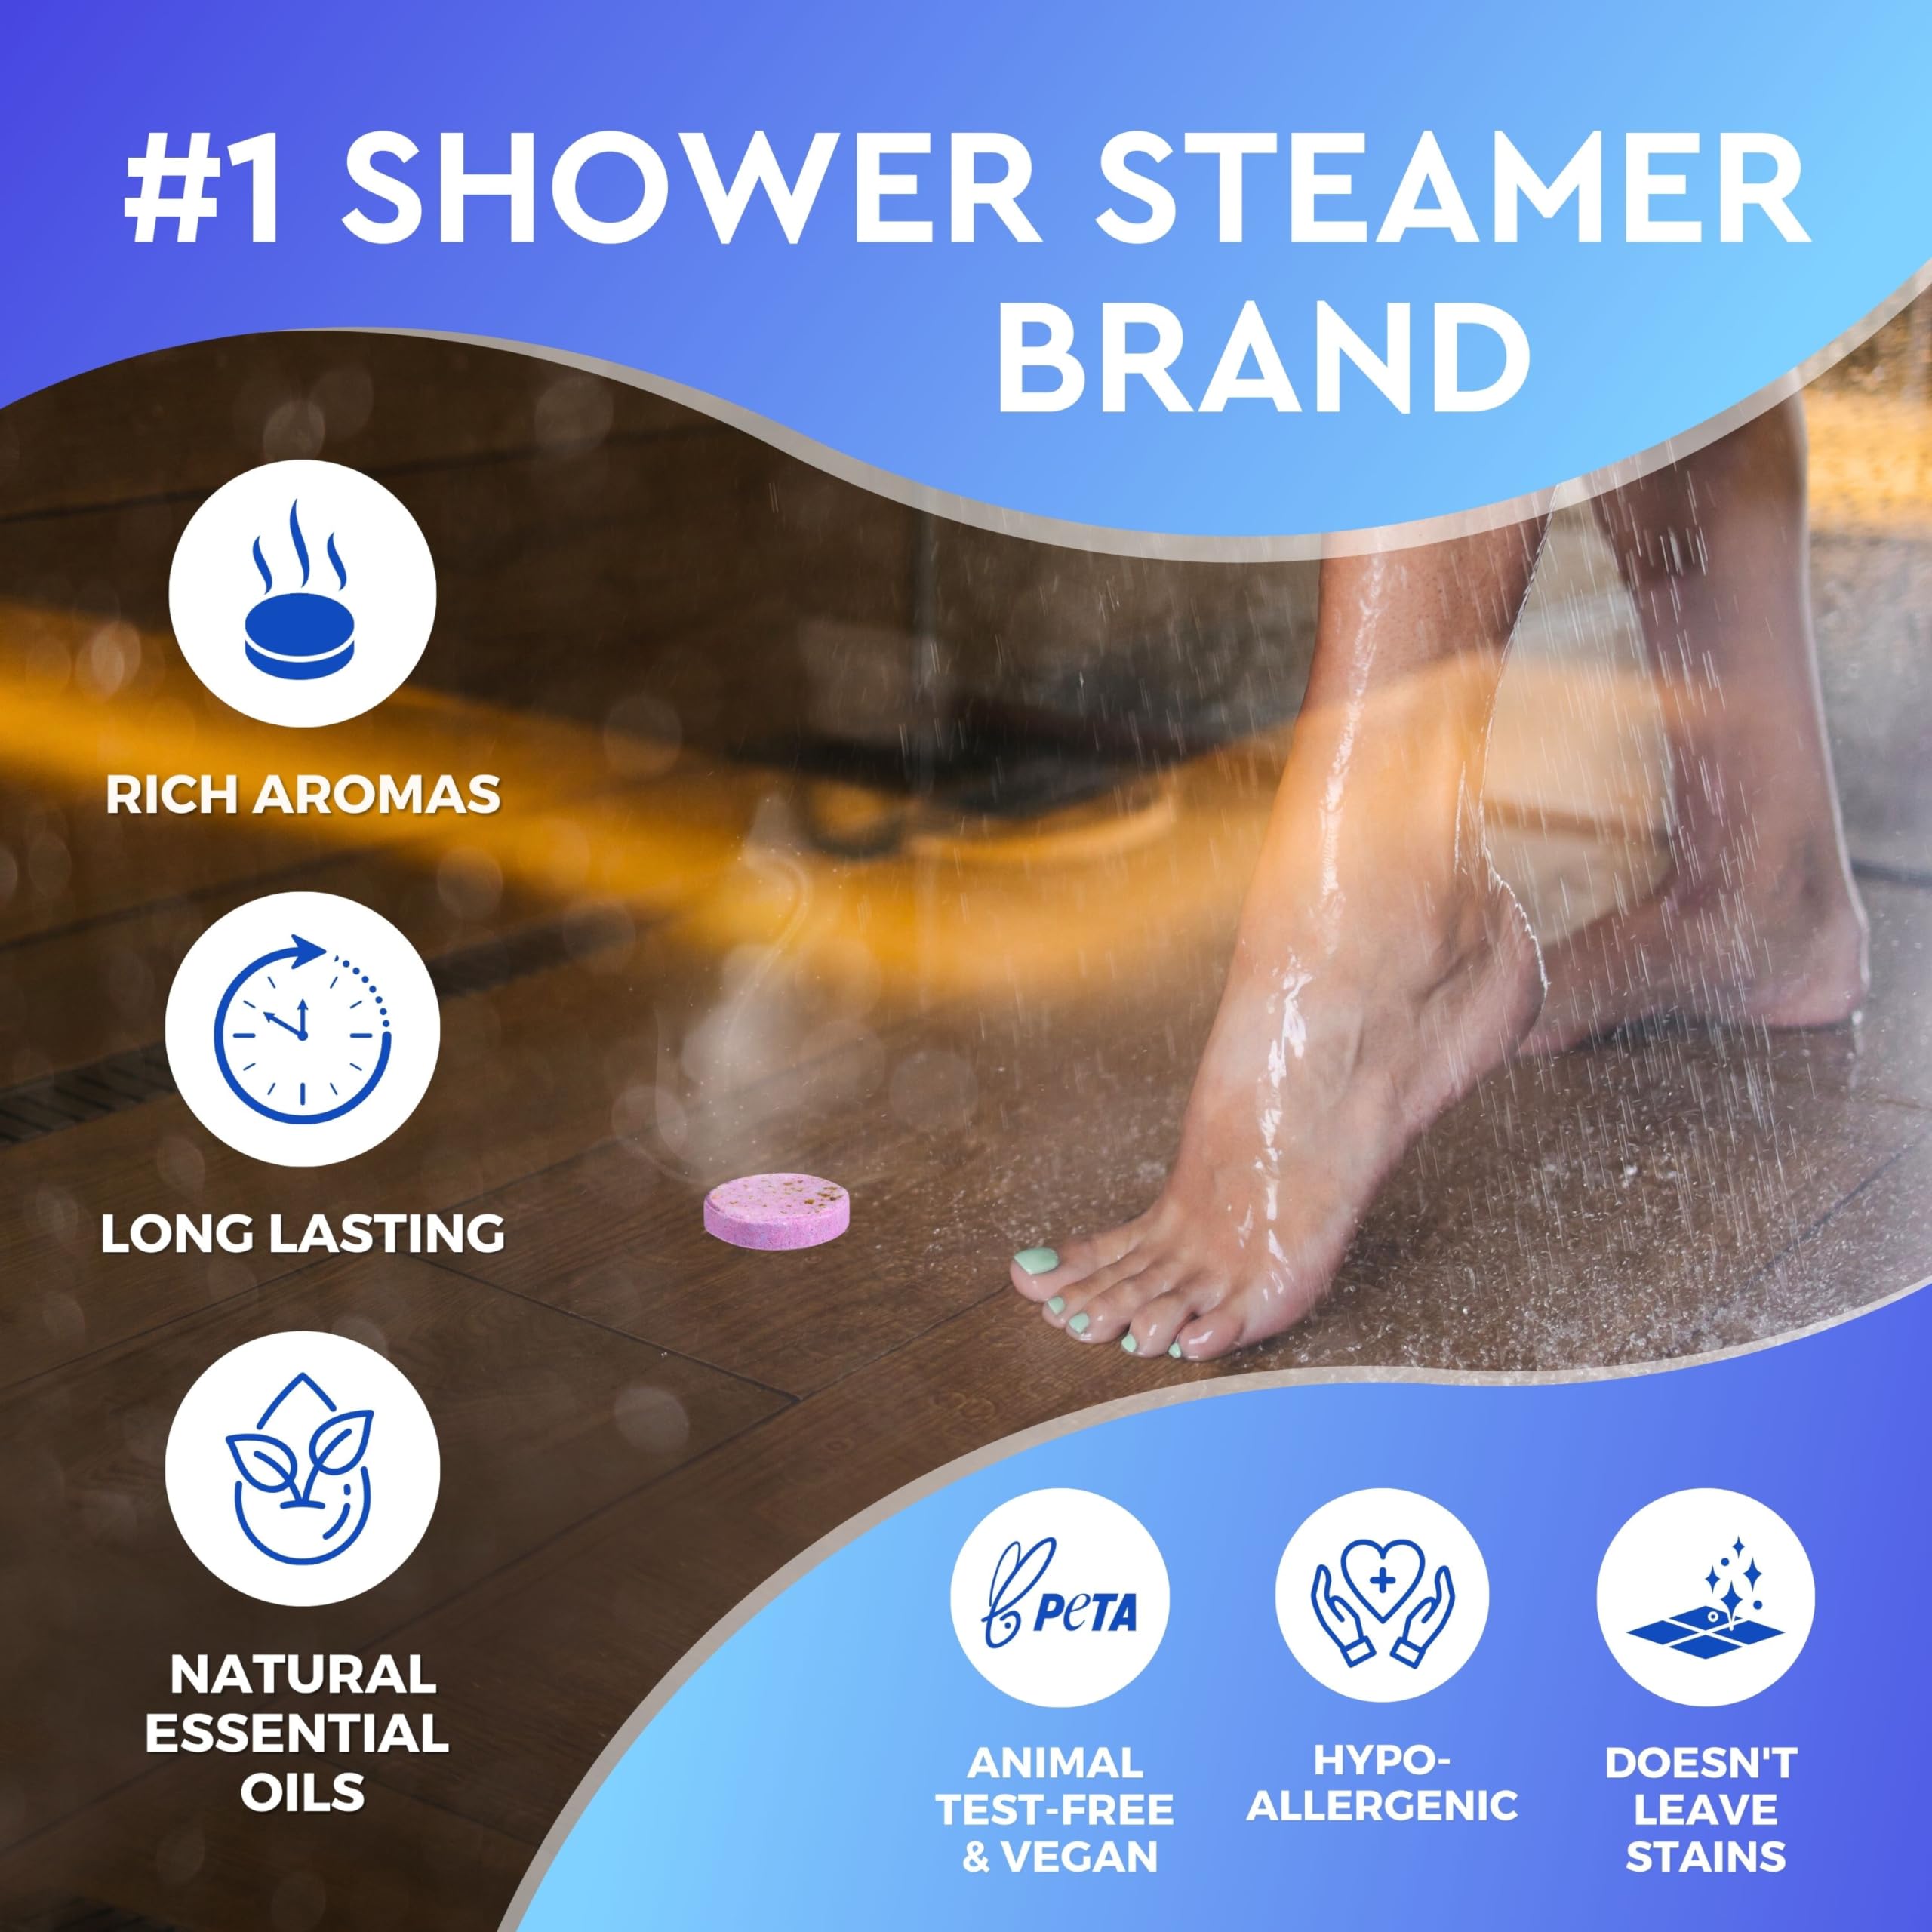 Cleverfy Shower Steamers Pack of 18 and Pack of 6: Blue Variety Pack Bundle. Shower Bombs with Essential Oils.